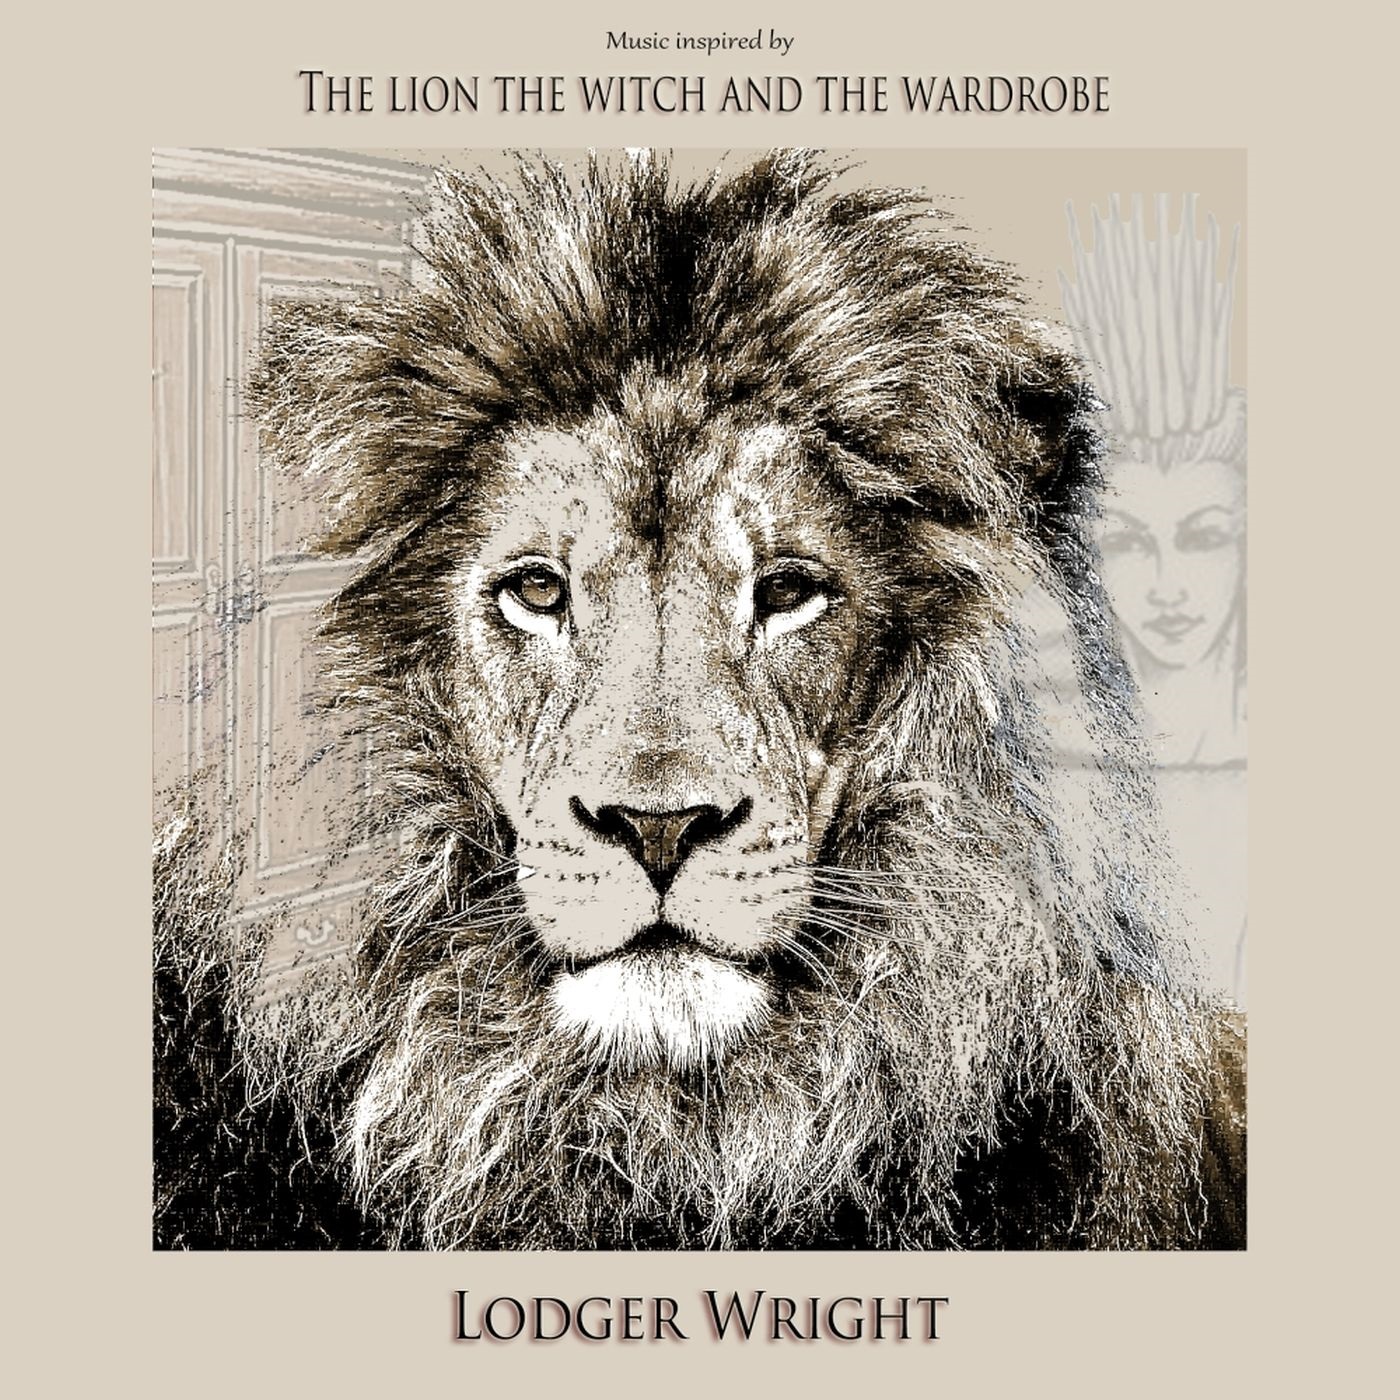 Lodger Wright – Music Inspired by The Lion The Witch and The Wardrobe (2020) [FLAC 24bit/96kHz]